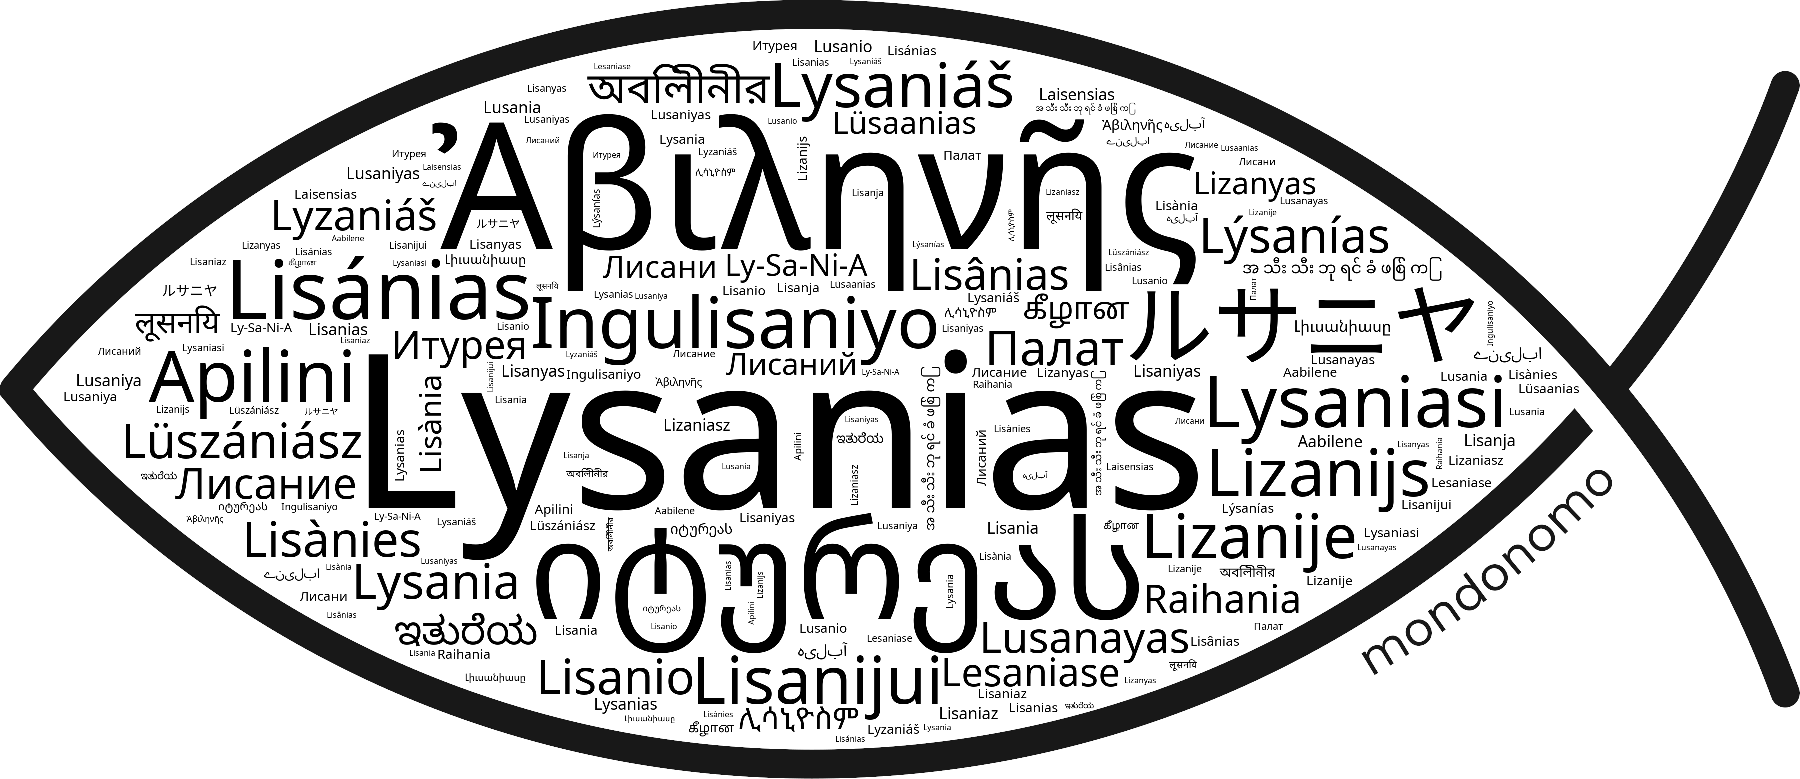 Name Lysanias in the world's Bibles